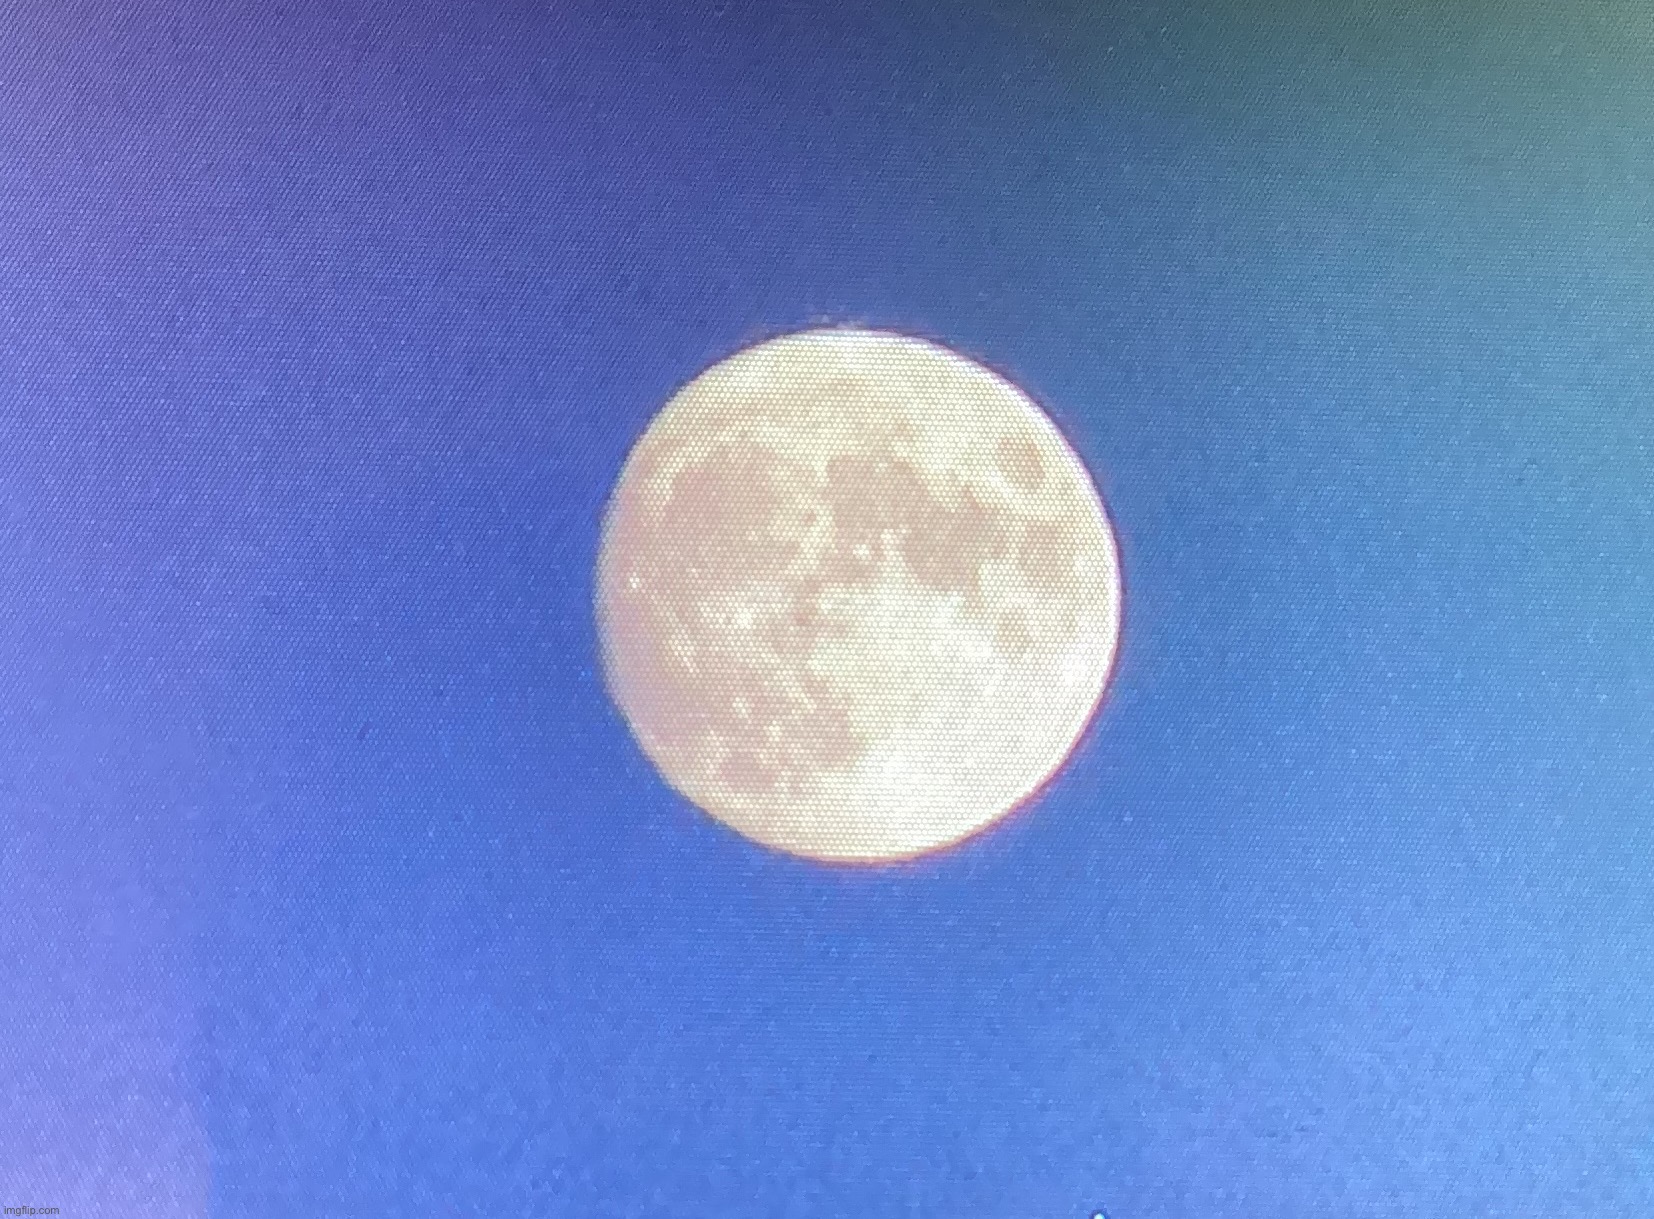 A picture of the moon I took on a camera of mine, an old Olympus I bought at a yard sale. Still no cable to upload the image. | image tagged in share your own photos | made w/ Imgflip meme maker